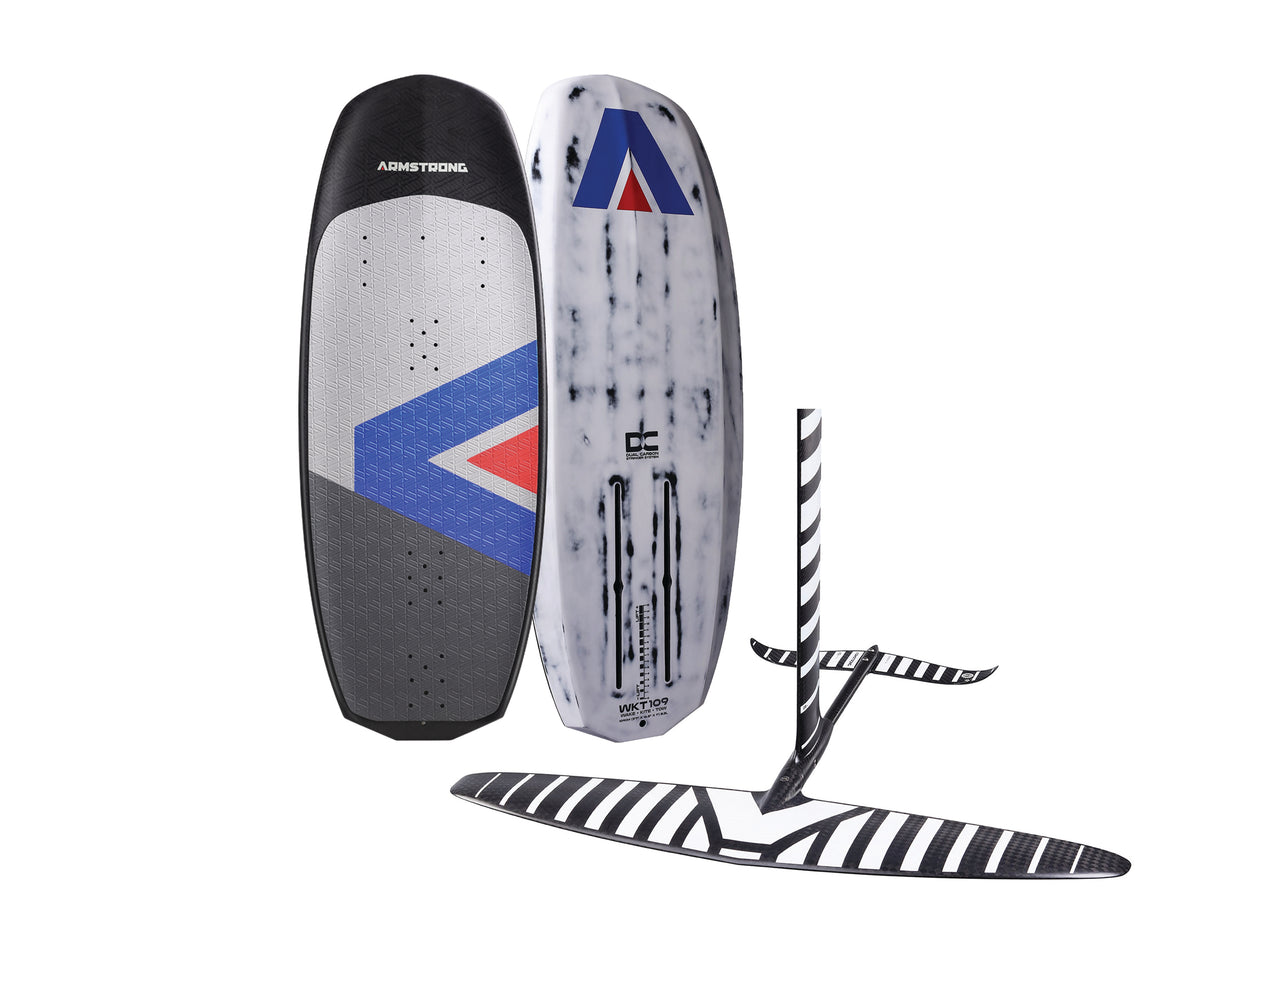 Armstrong Wakefoil Board W/ Armstrong HS1550 Foil Kit Package | 2023 | Pre-Order